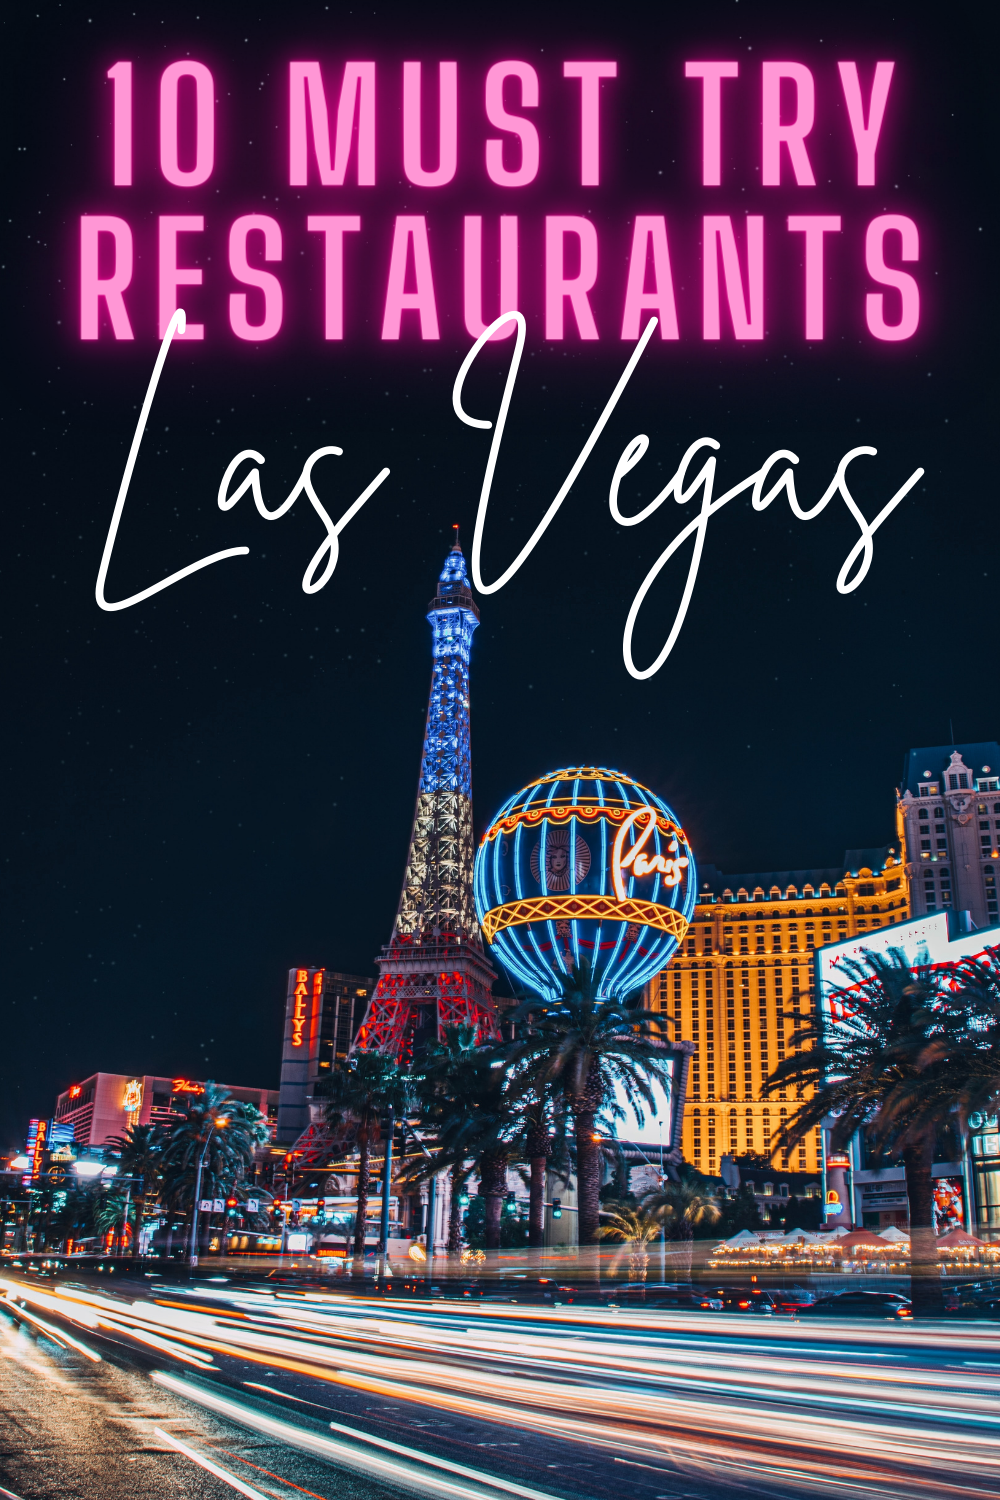 Looking for the best Las Vegas restaurants to enjoy? I’m sharing 10 must try restaurants in Las Vegas for anyone visiting Sin City!